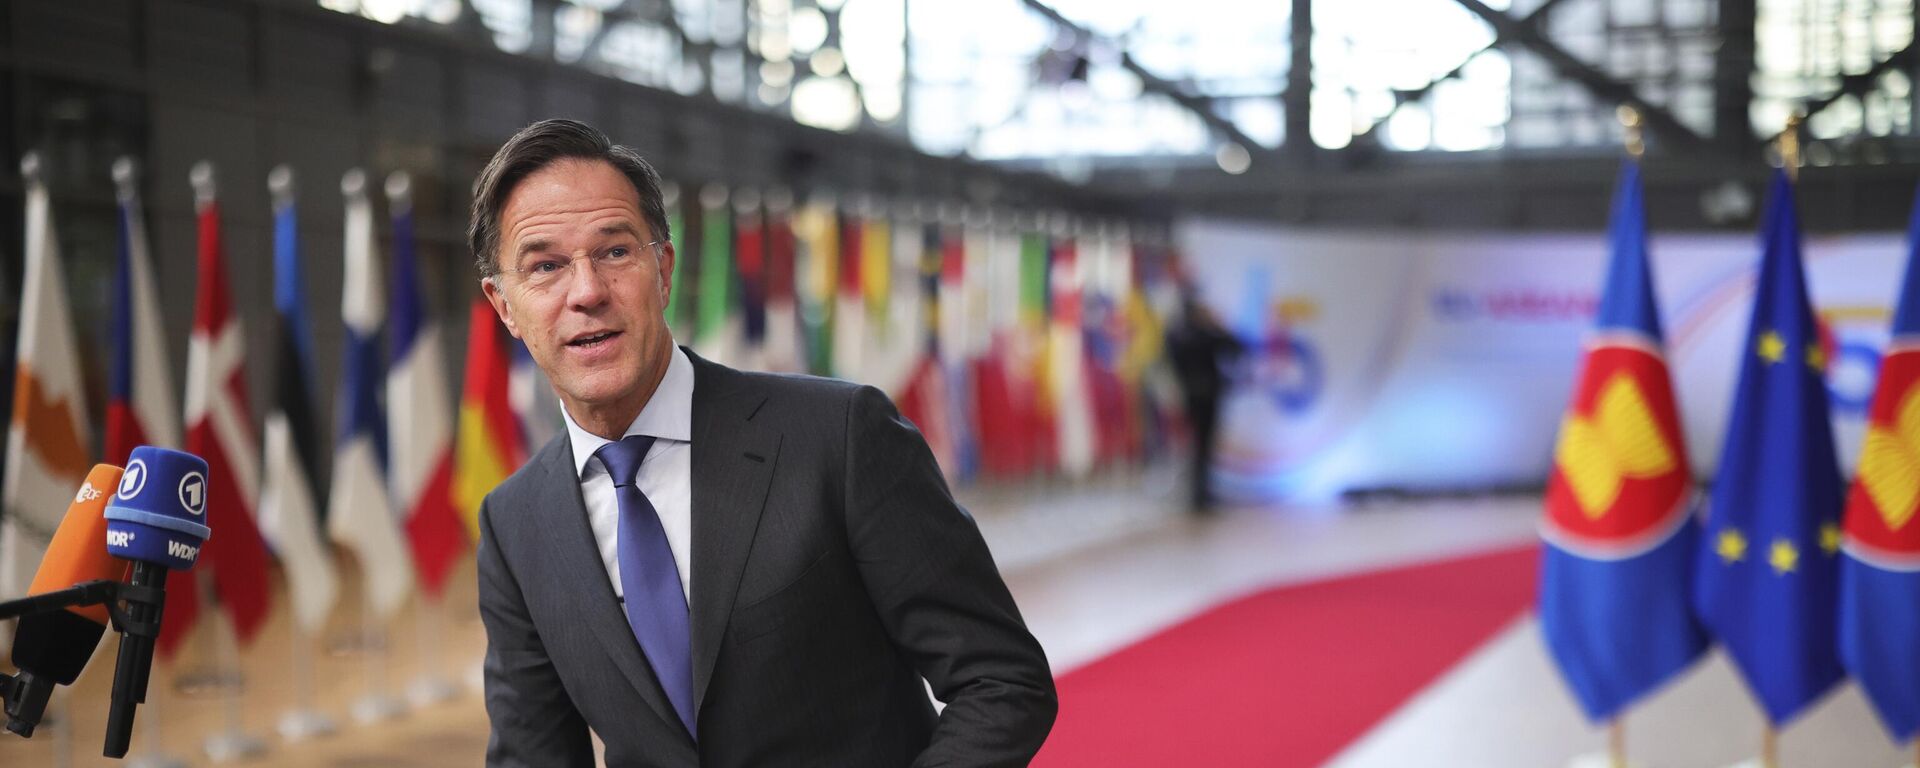 Netherland's Prime Minister Mark Rutte speaks with the media as he arrives for the EU-ASEAN summit in Brussels, Wednesday, Dec. 14, 2022 - Sputnik International, 1920, 19.12.2022